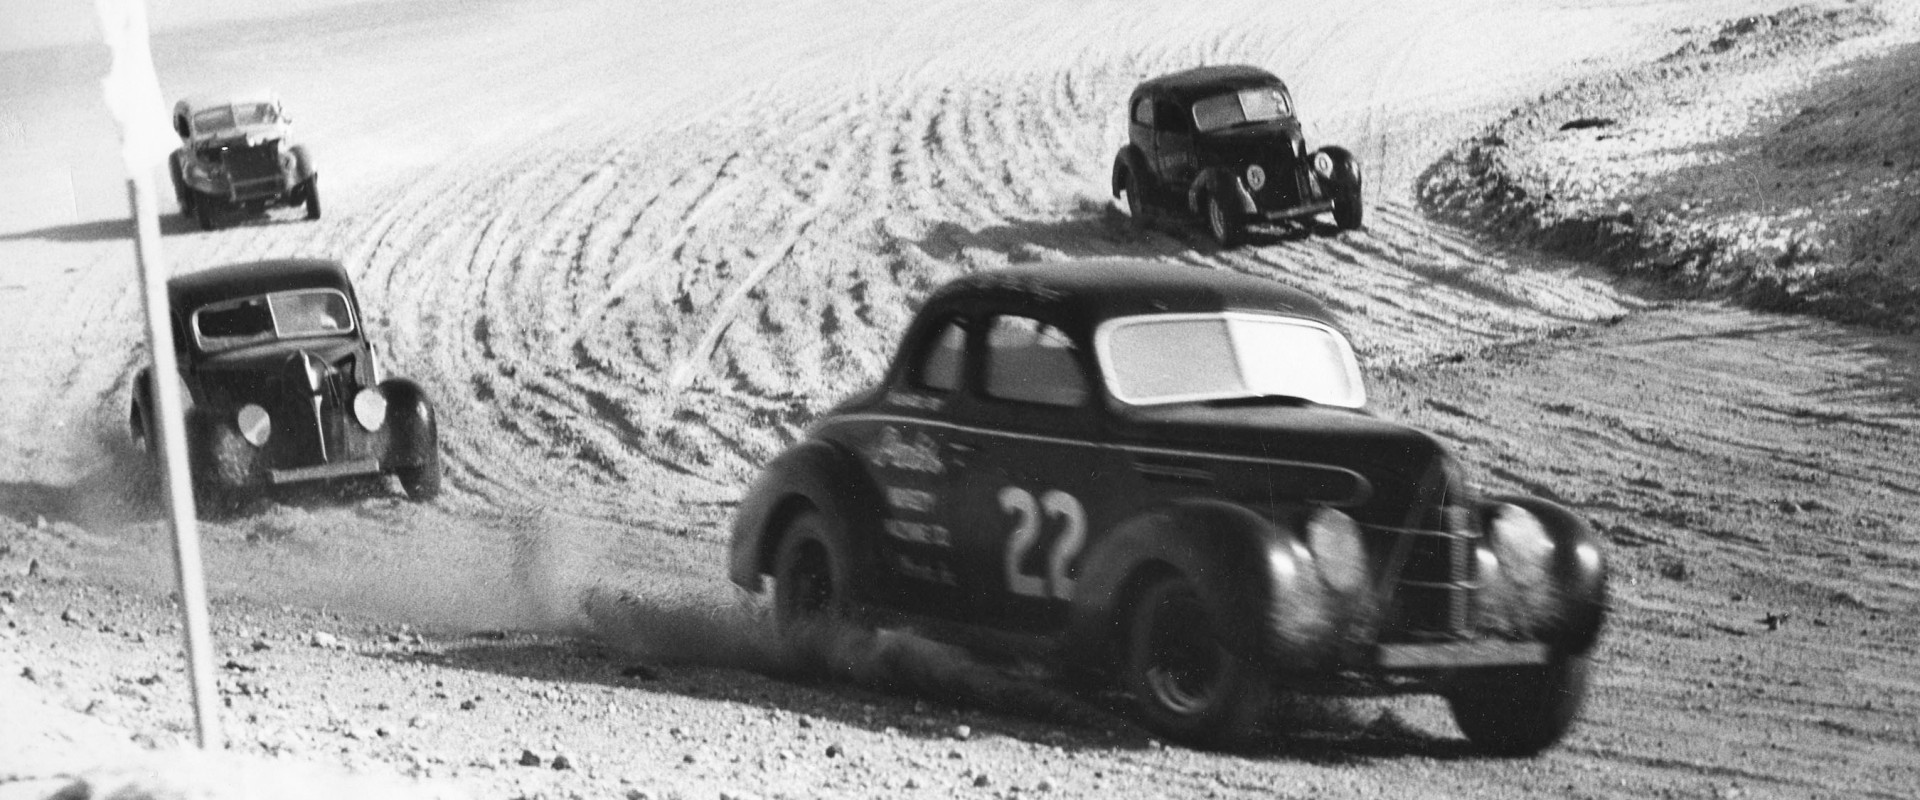 The Thrilling World of Nascar Sanctioned Races